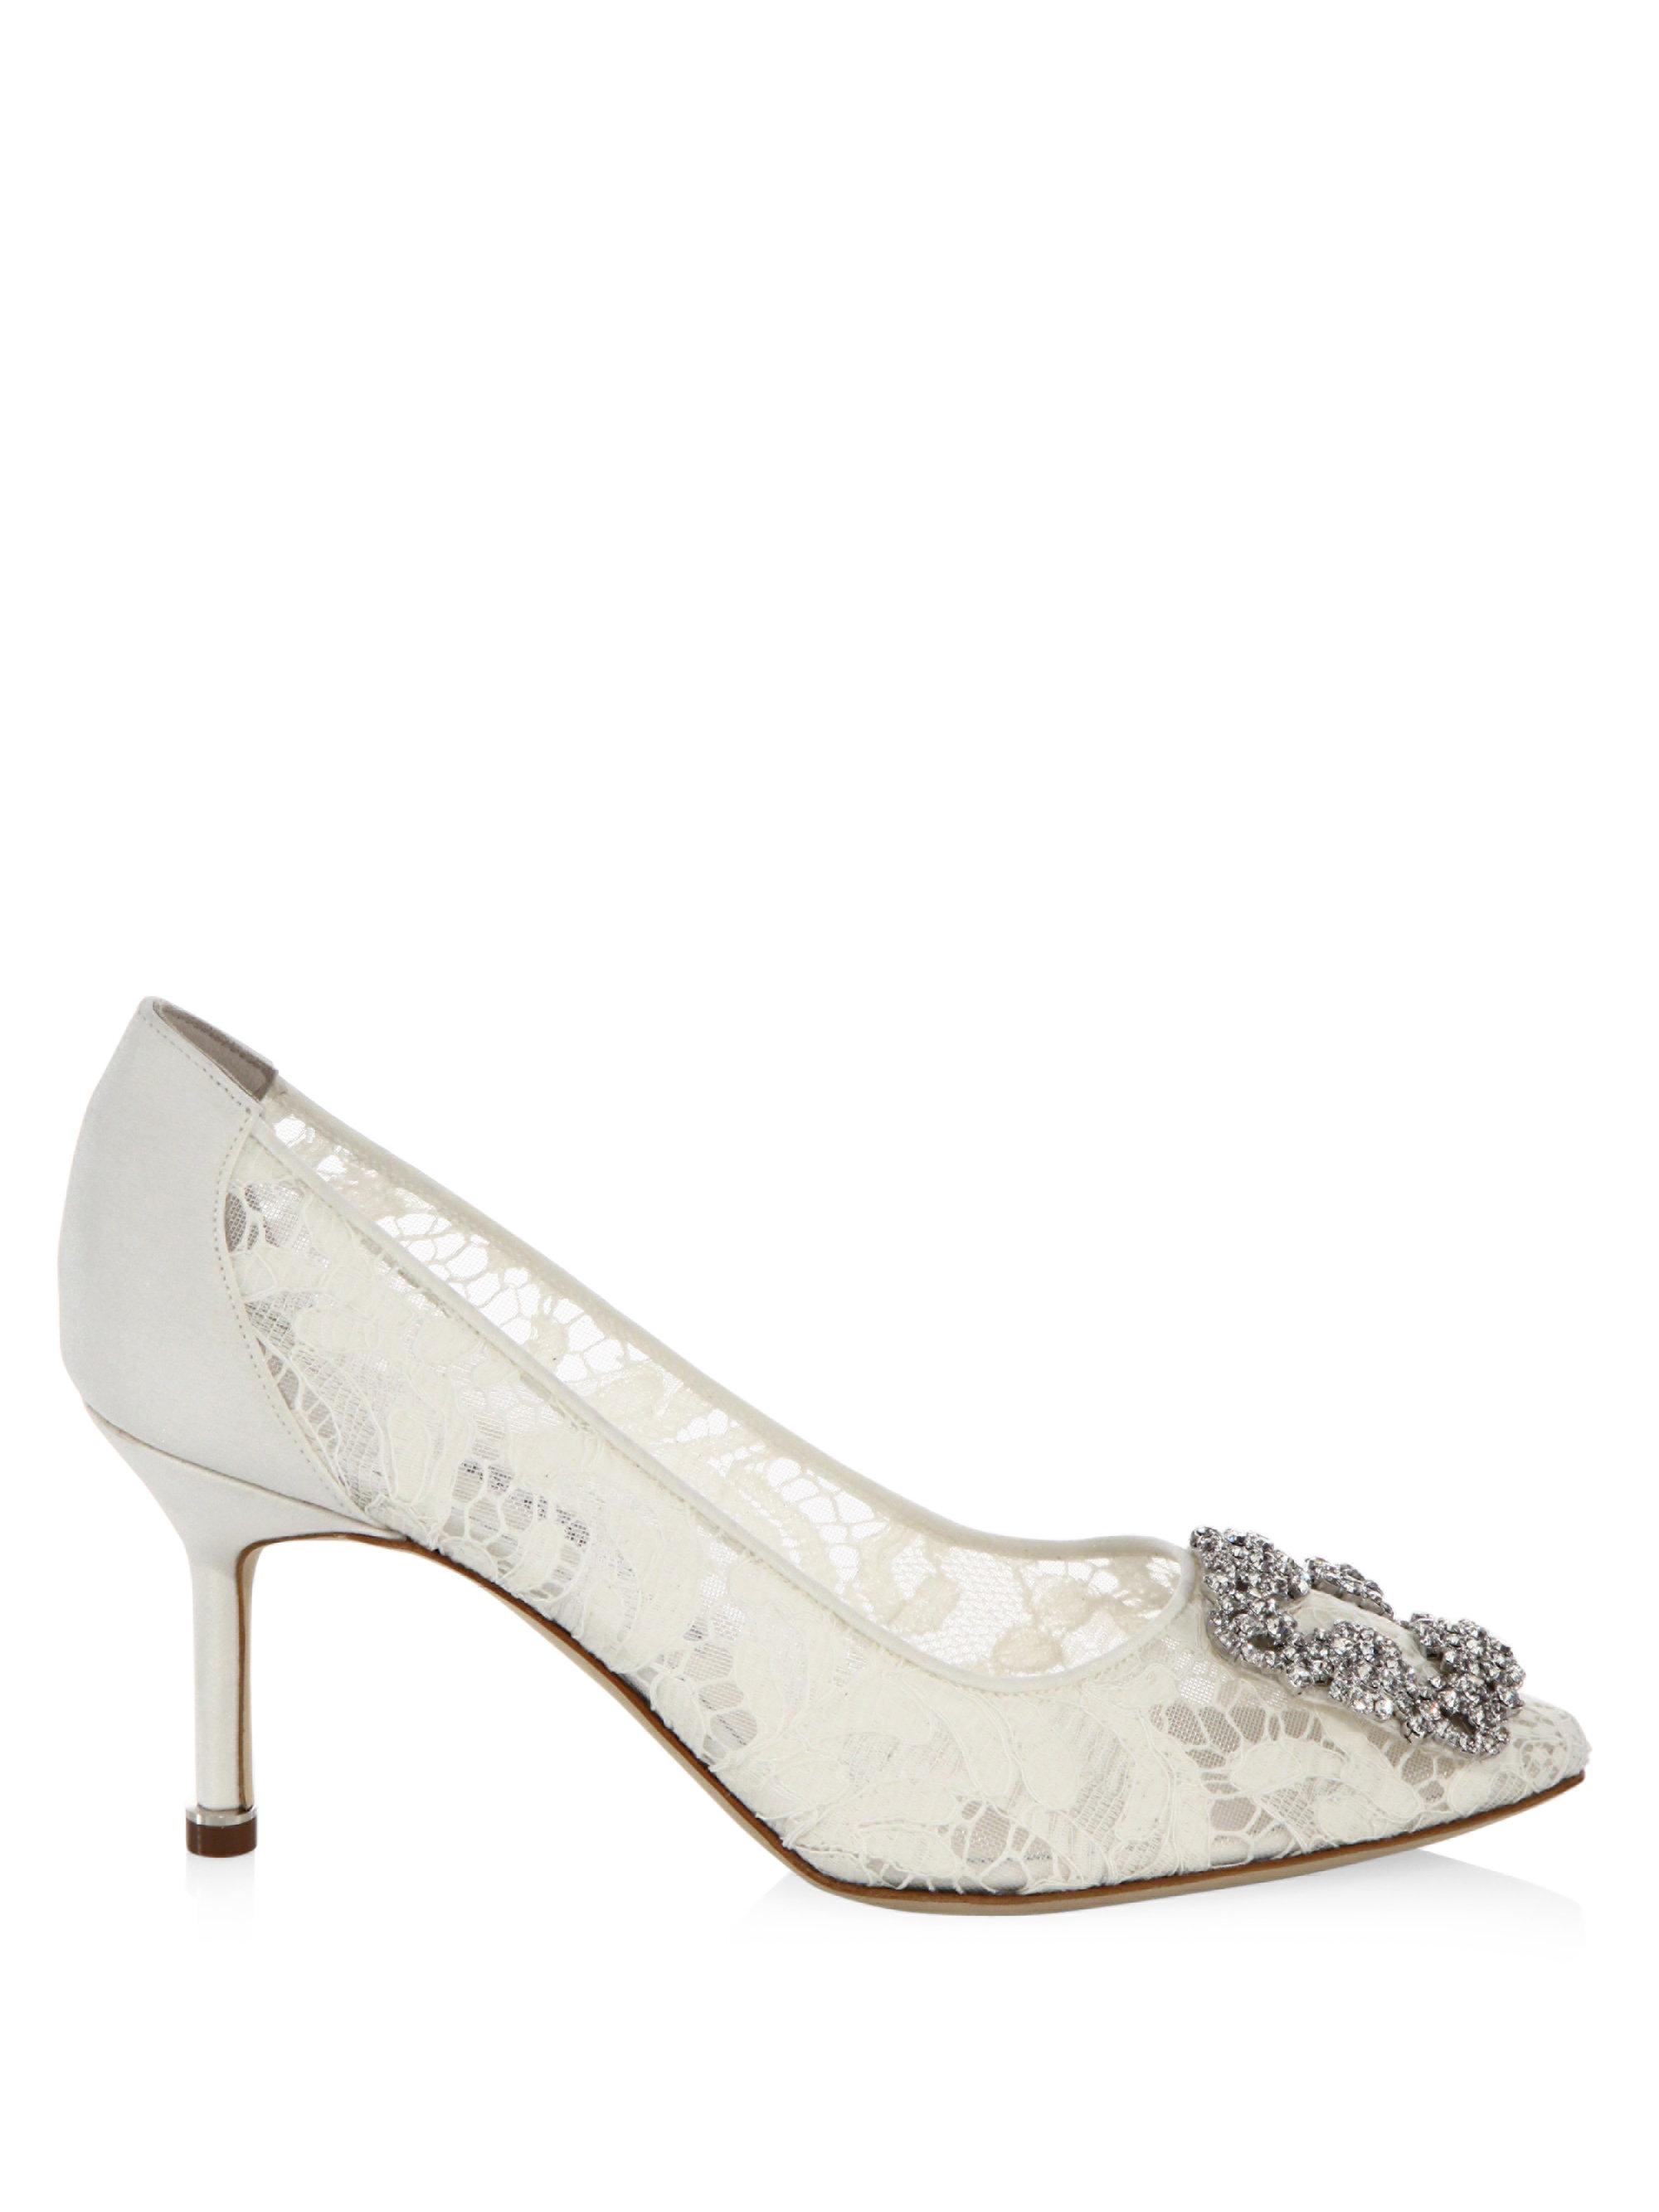 Lyst - Manolo Blahnik Hangisi 70 Lace Pumps in White